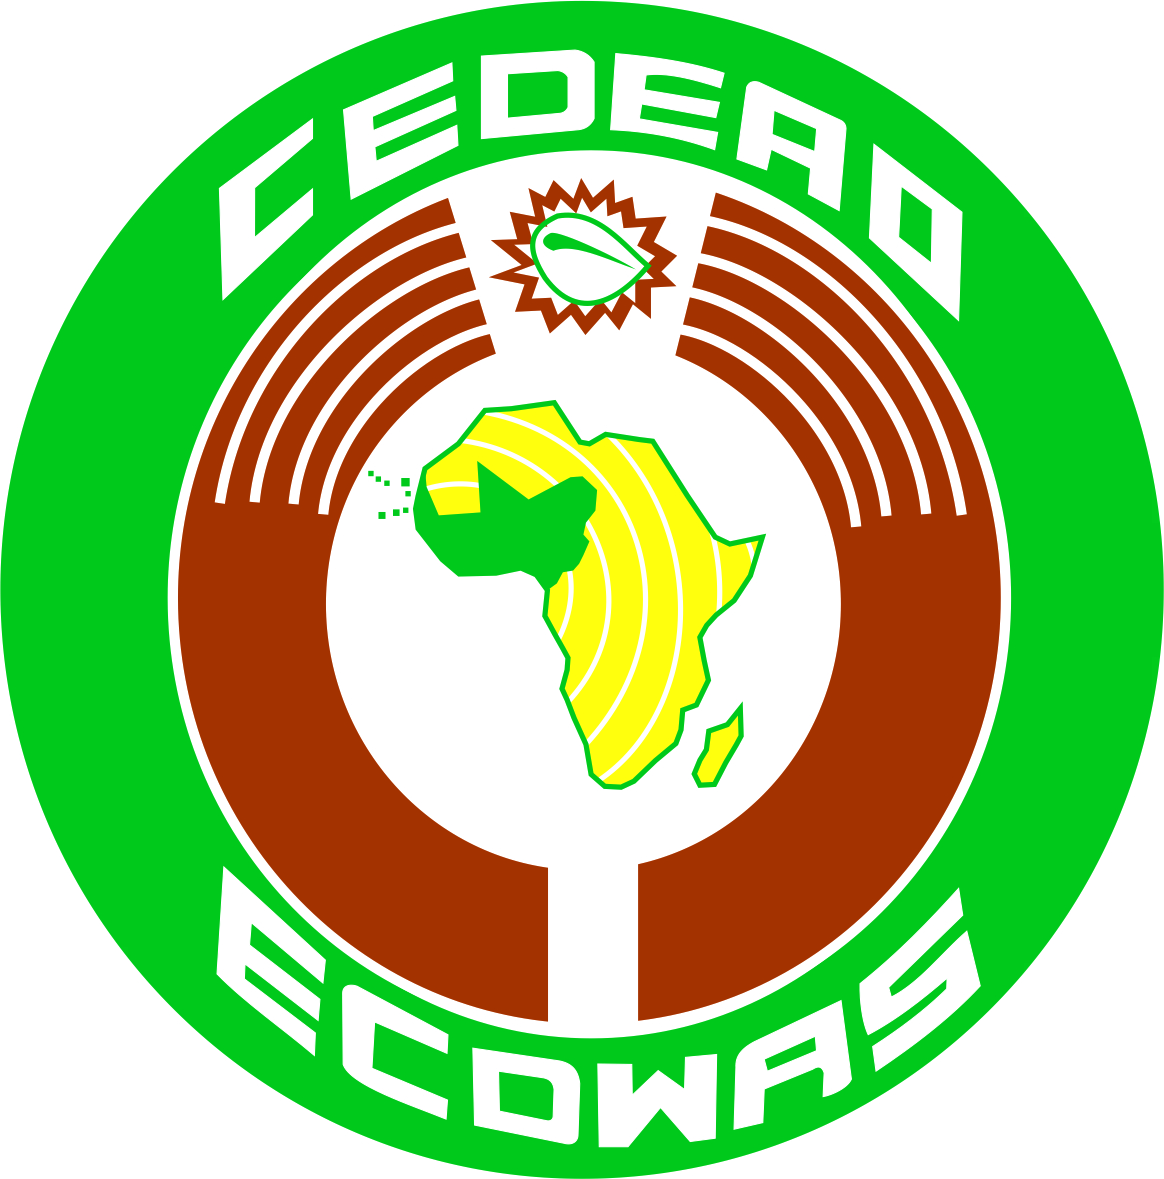 Economic Community of West African States (ECOWAS) Commission and the Diplomatic Corps Resolve to Promote Inclusive and Peaceful Transitional Process in West Africa